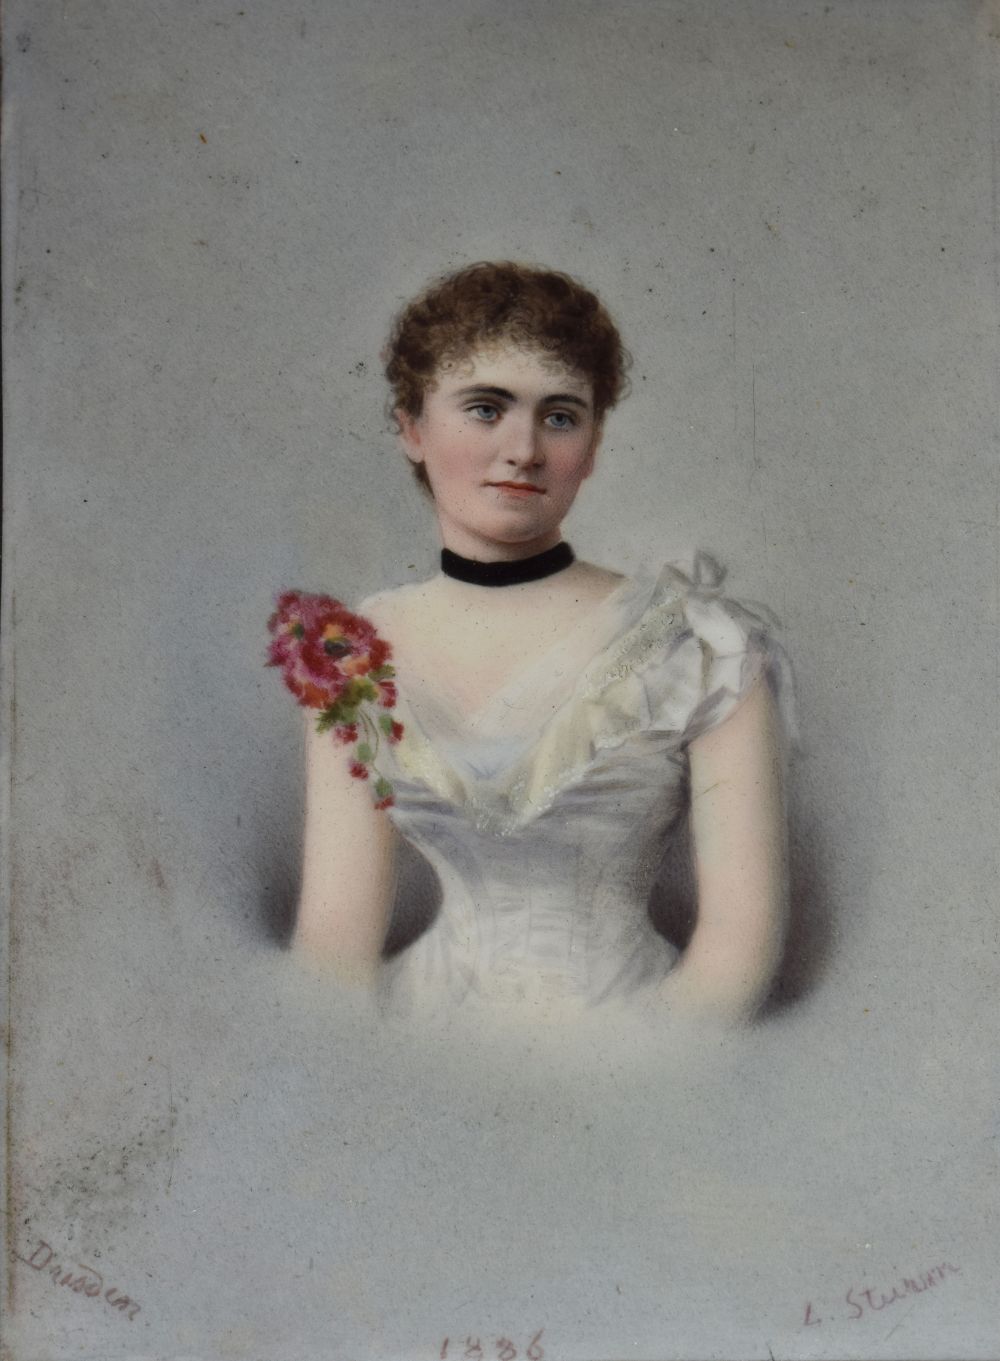 L. Sturn (19th Century German) - Portrait miniature on porcelain - Lady in a white dress, signed and